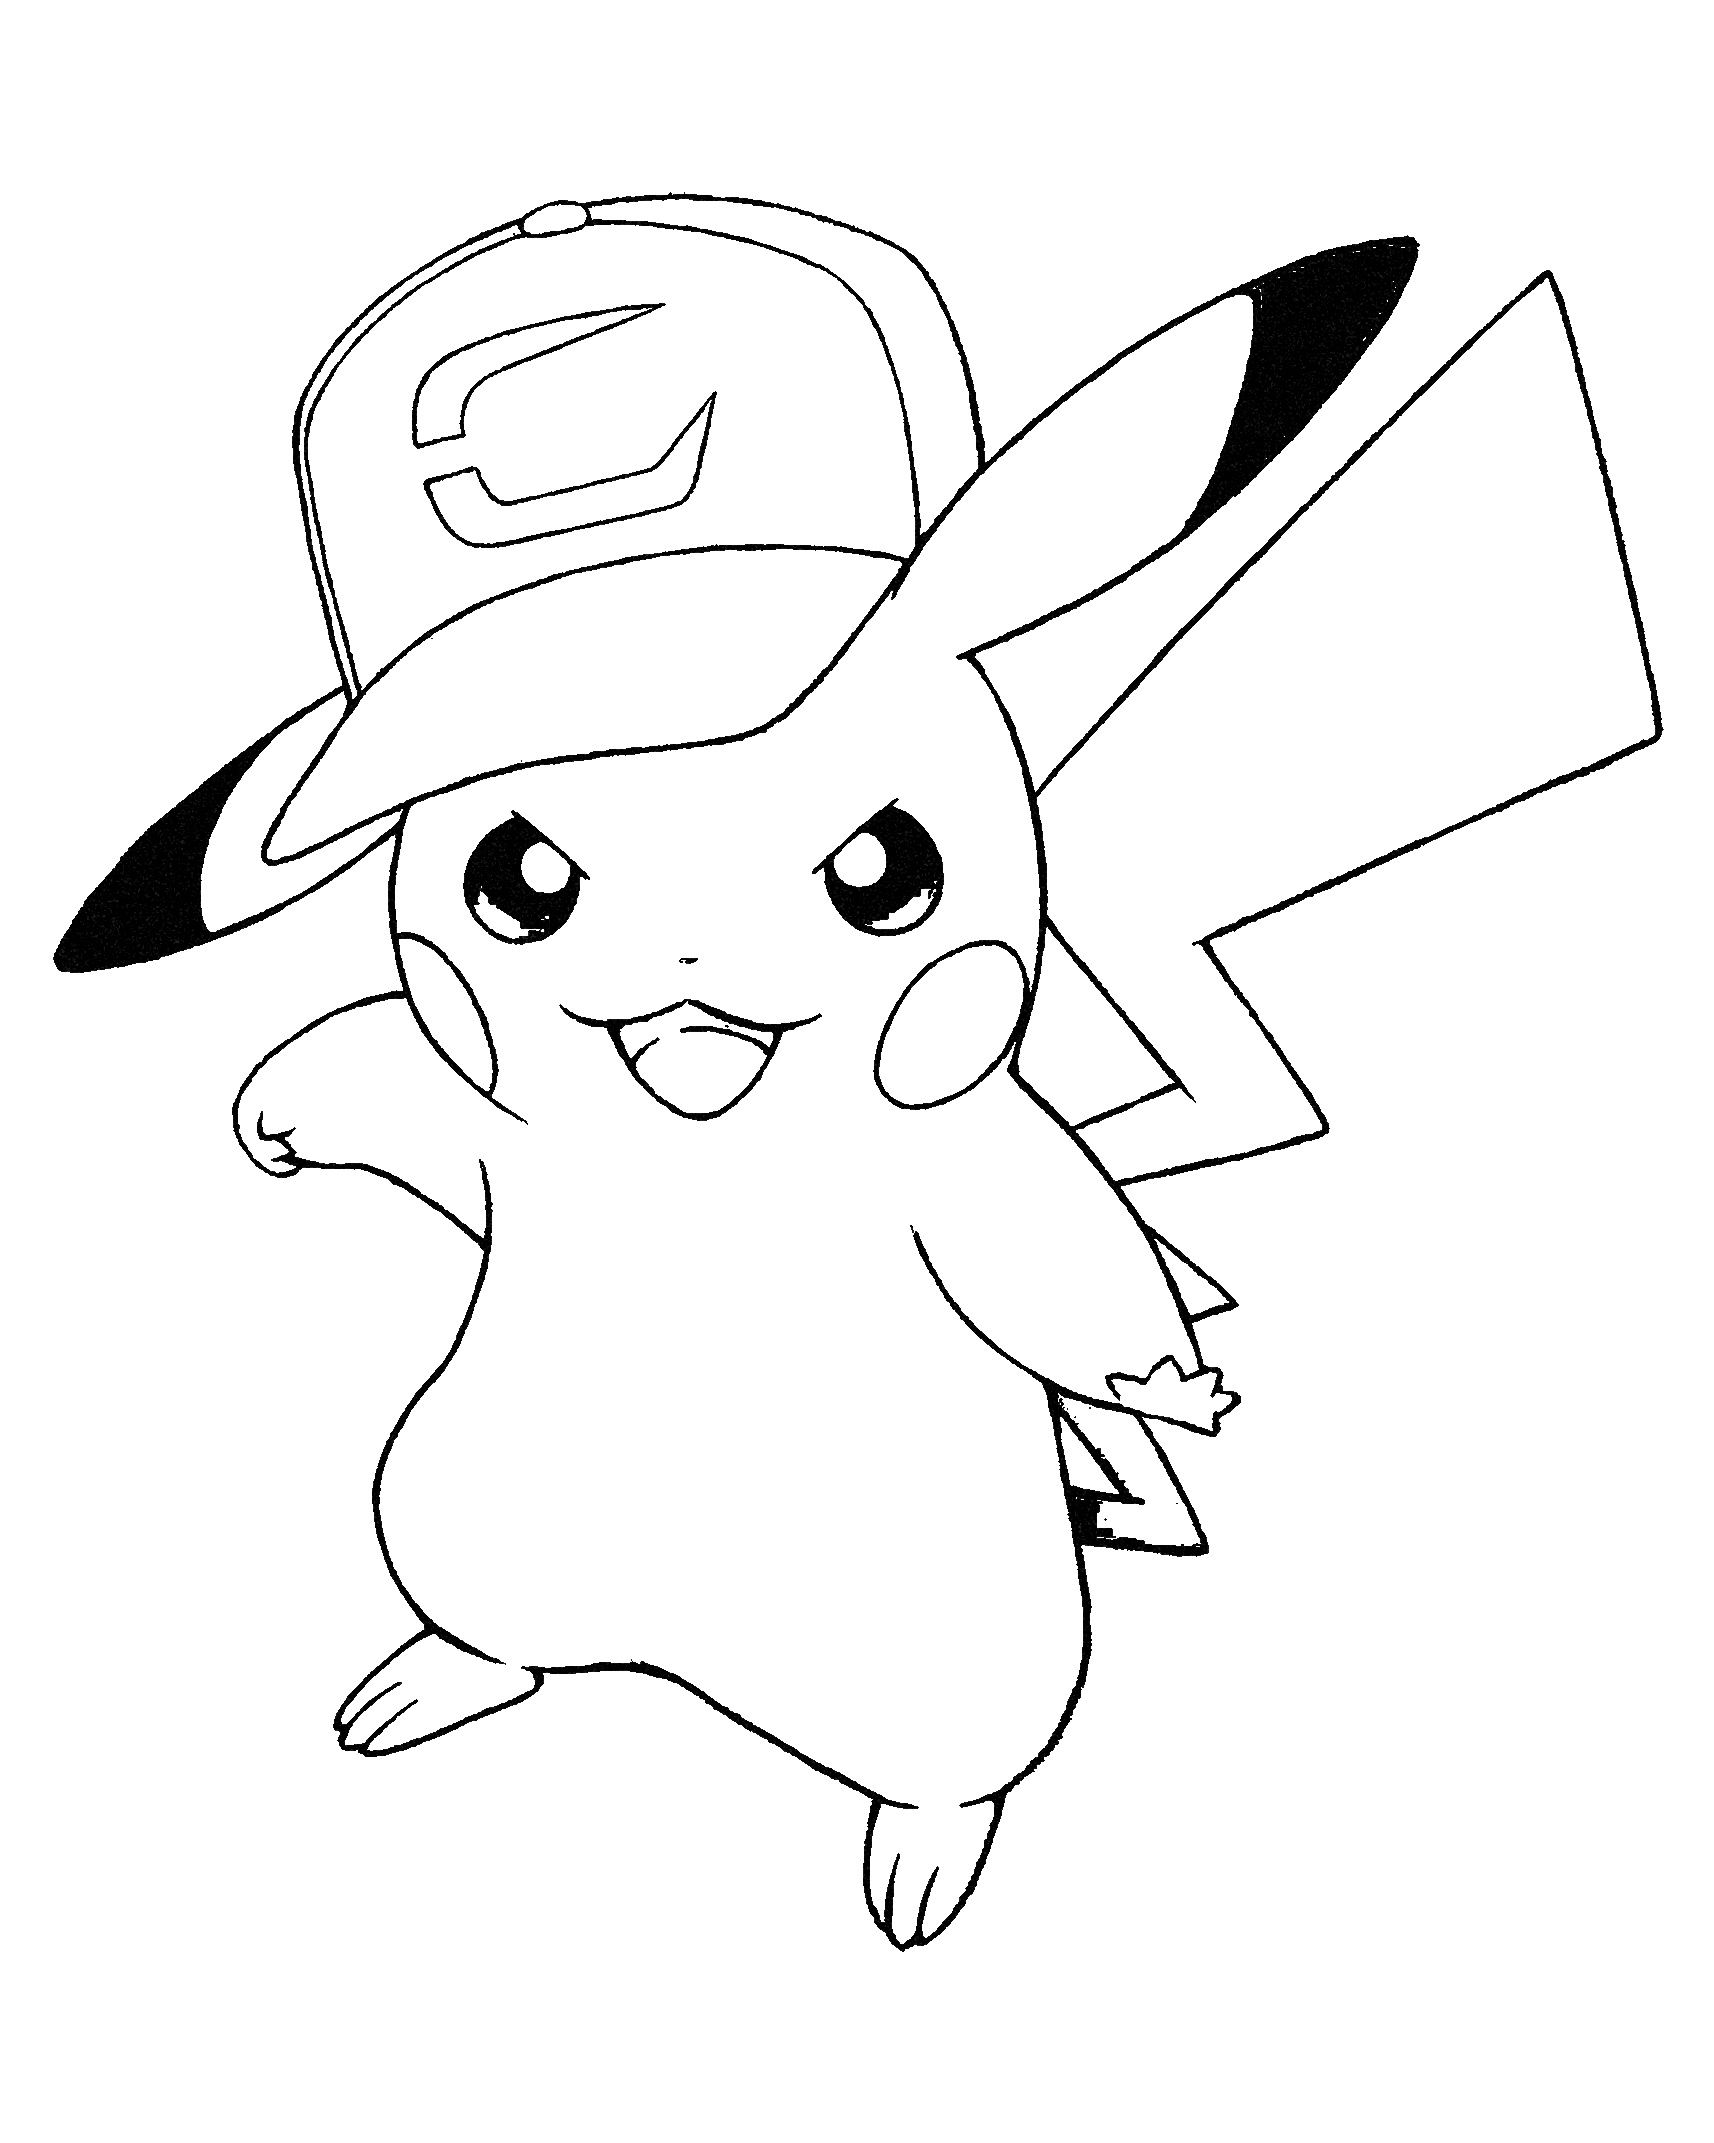 10 Free Pikachu Coloring Pages For Kids BestAppsForKids